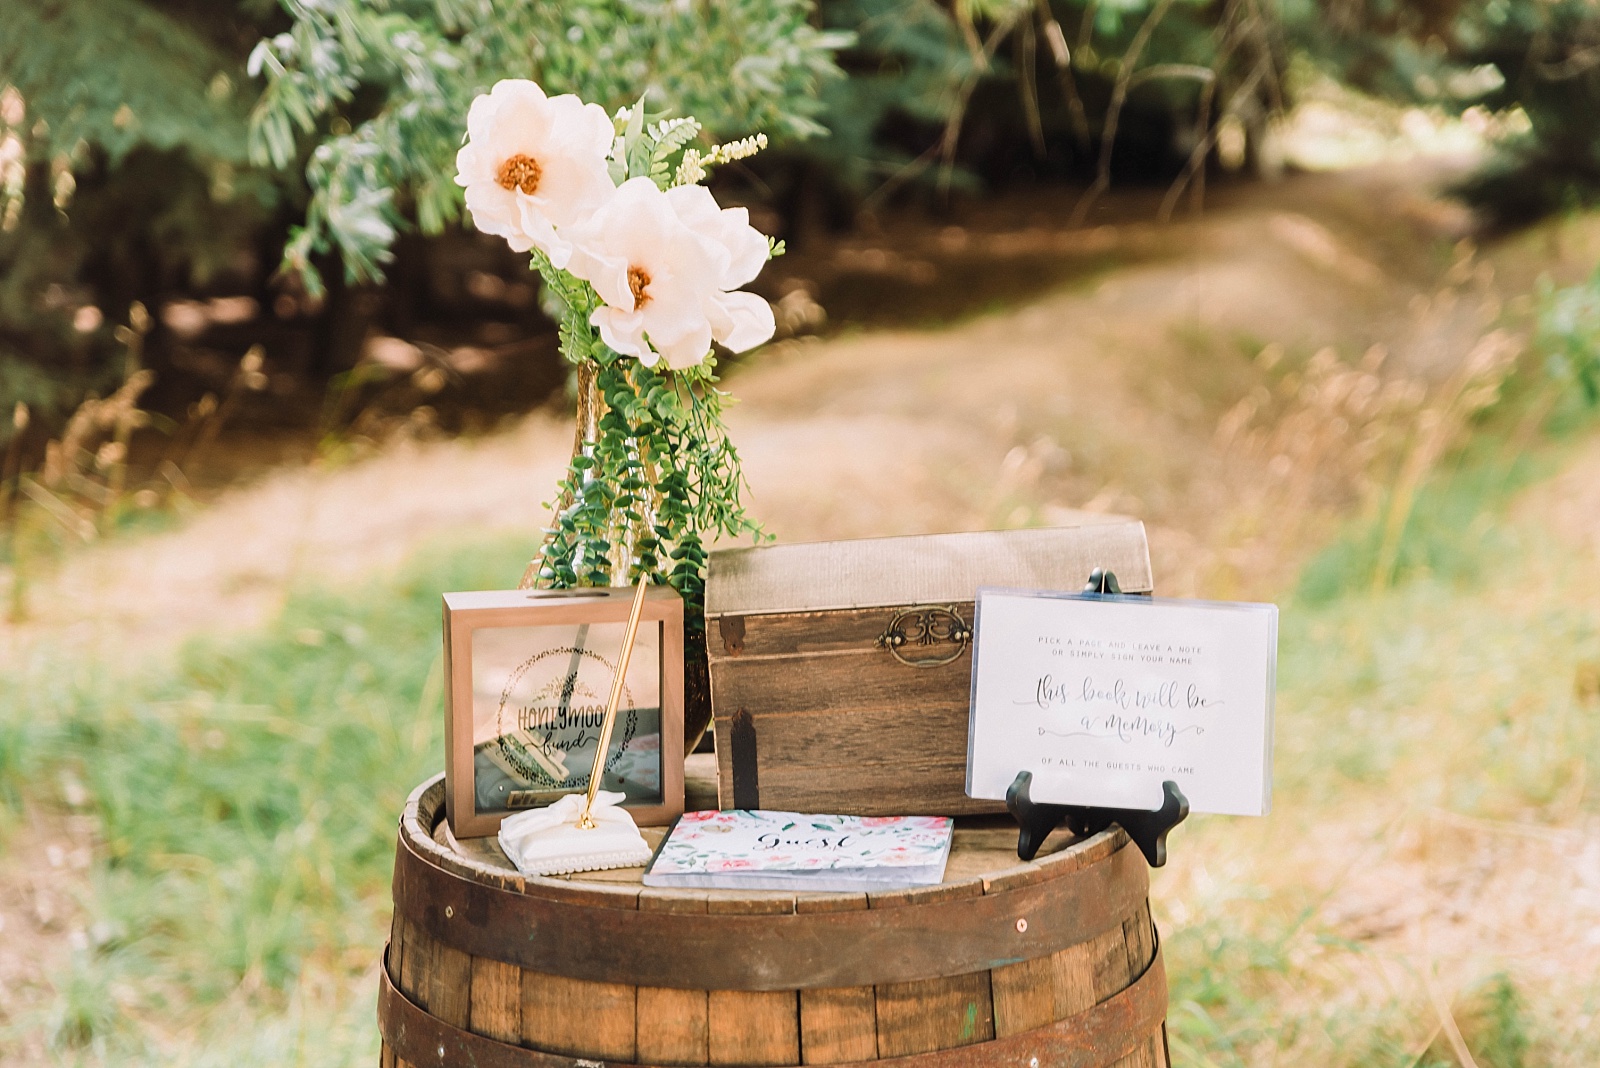 barrel with flowers and sign in book at outdoor wedding